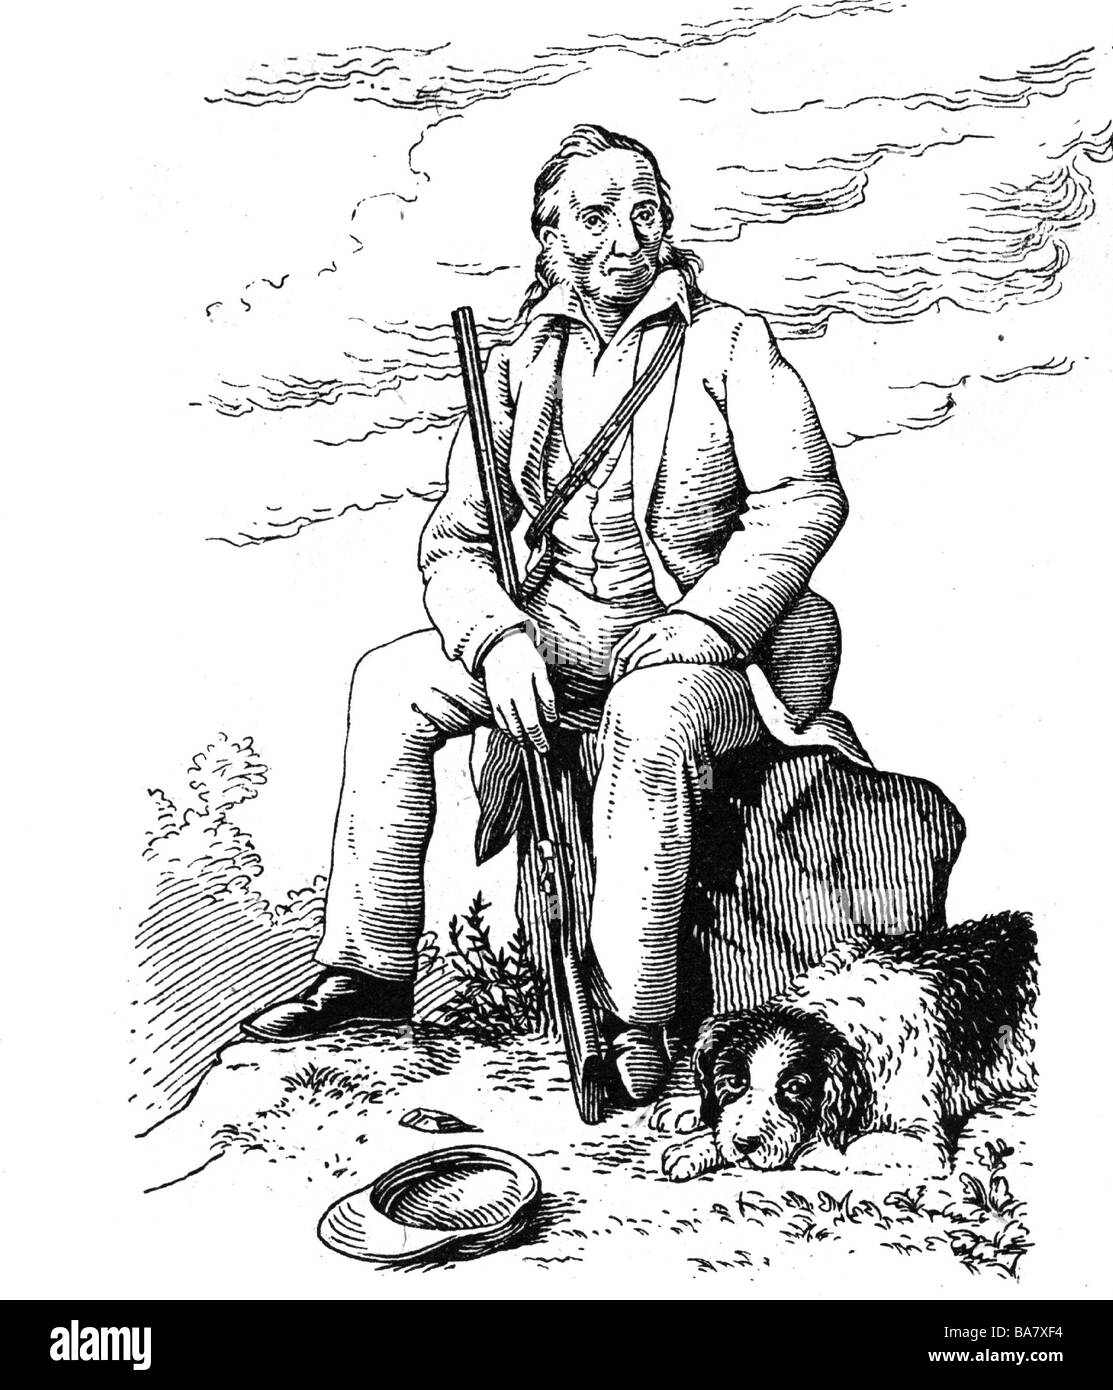 Boone, Daniel, 2.11.1734 - 26.9.1820, American pioneer and hunter, full length, with a dog, drawing by August Tschinke, 1948, Stock Photo